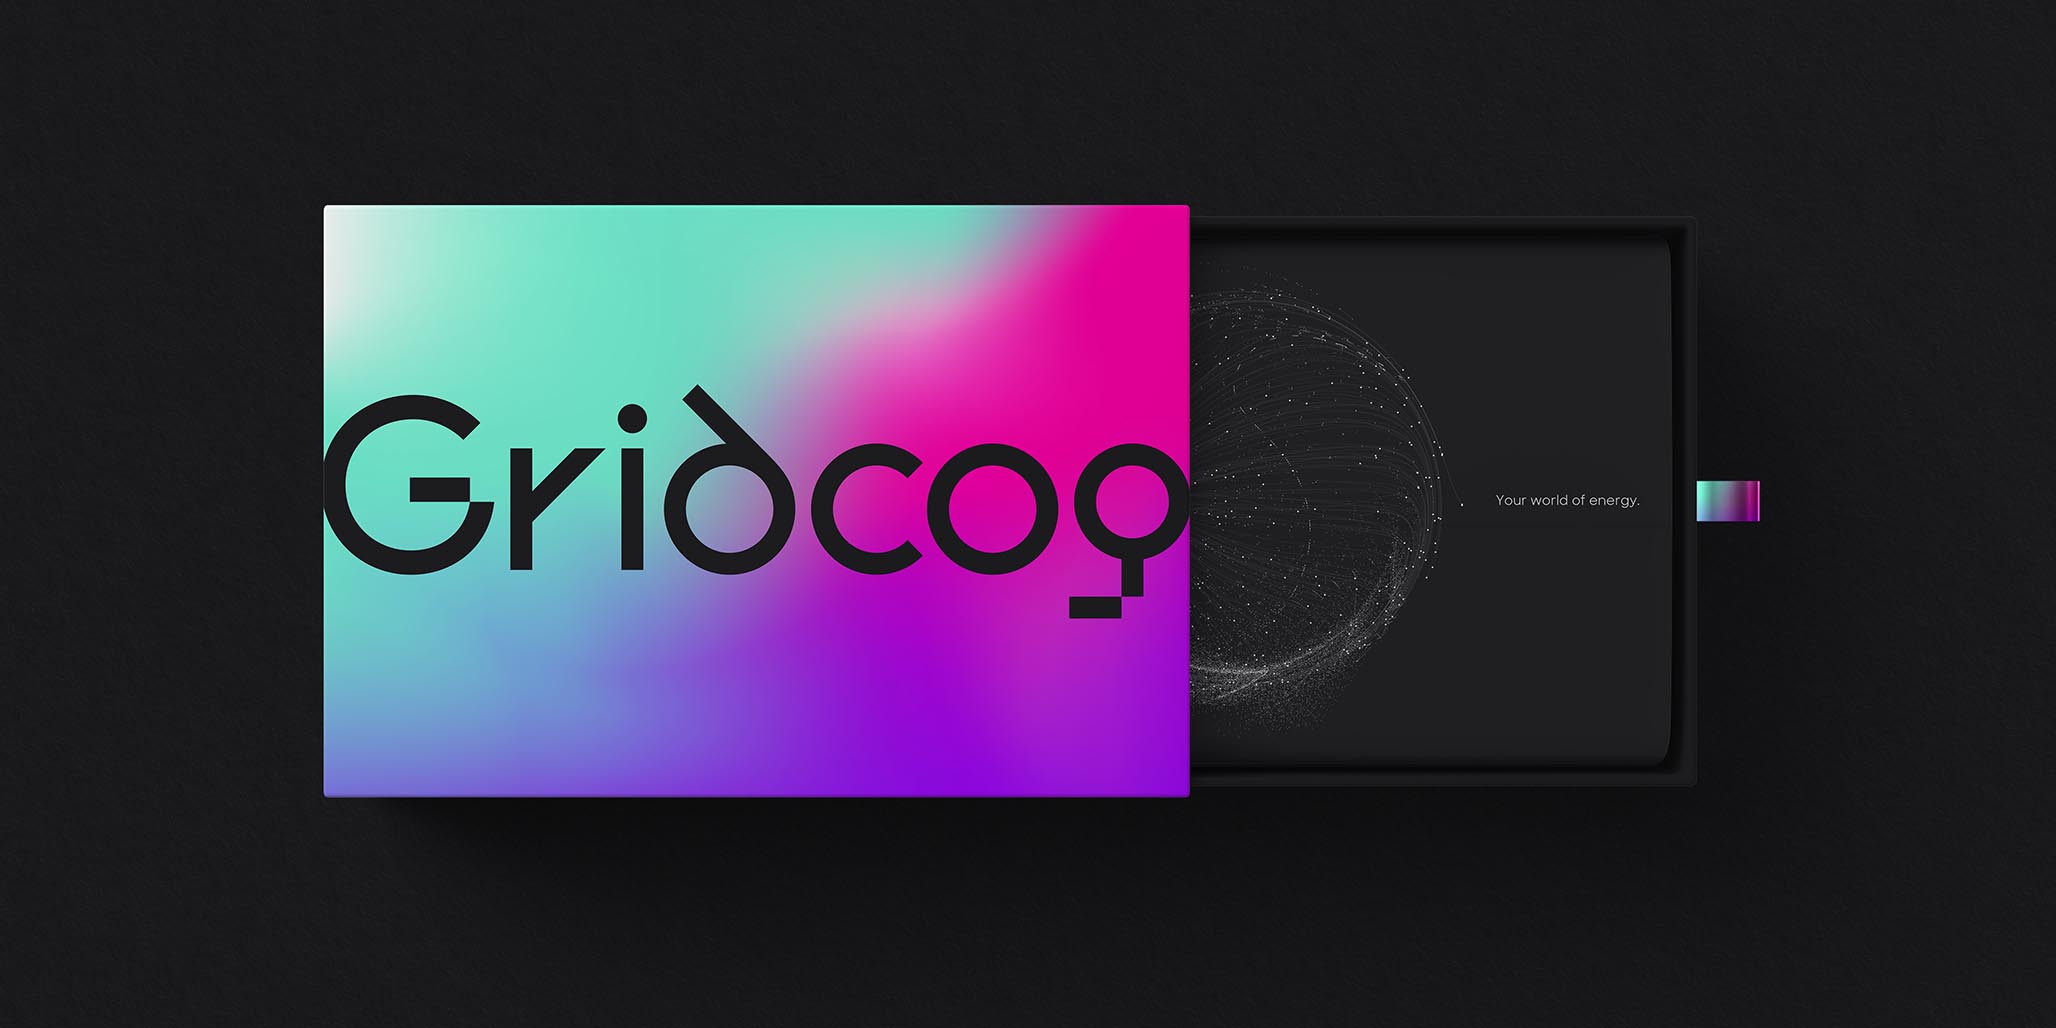 Rebrand for Australian tech company, featuring Brand Positioning, Brand Identity and Branding. Done by the Brand Designers of Percept, image D